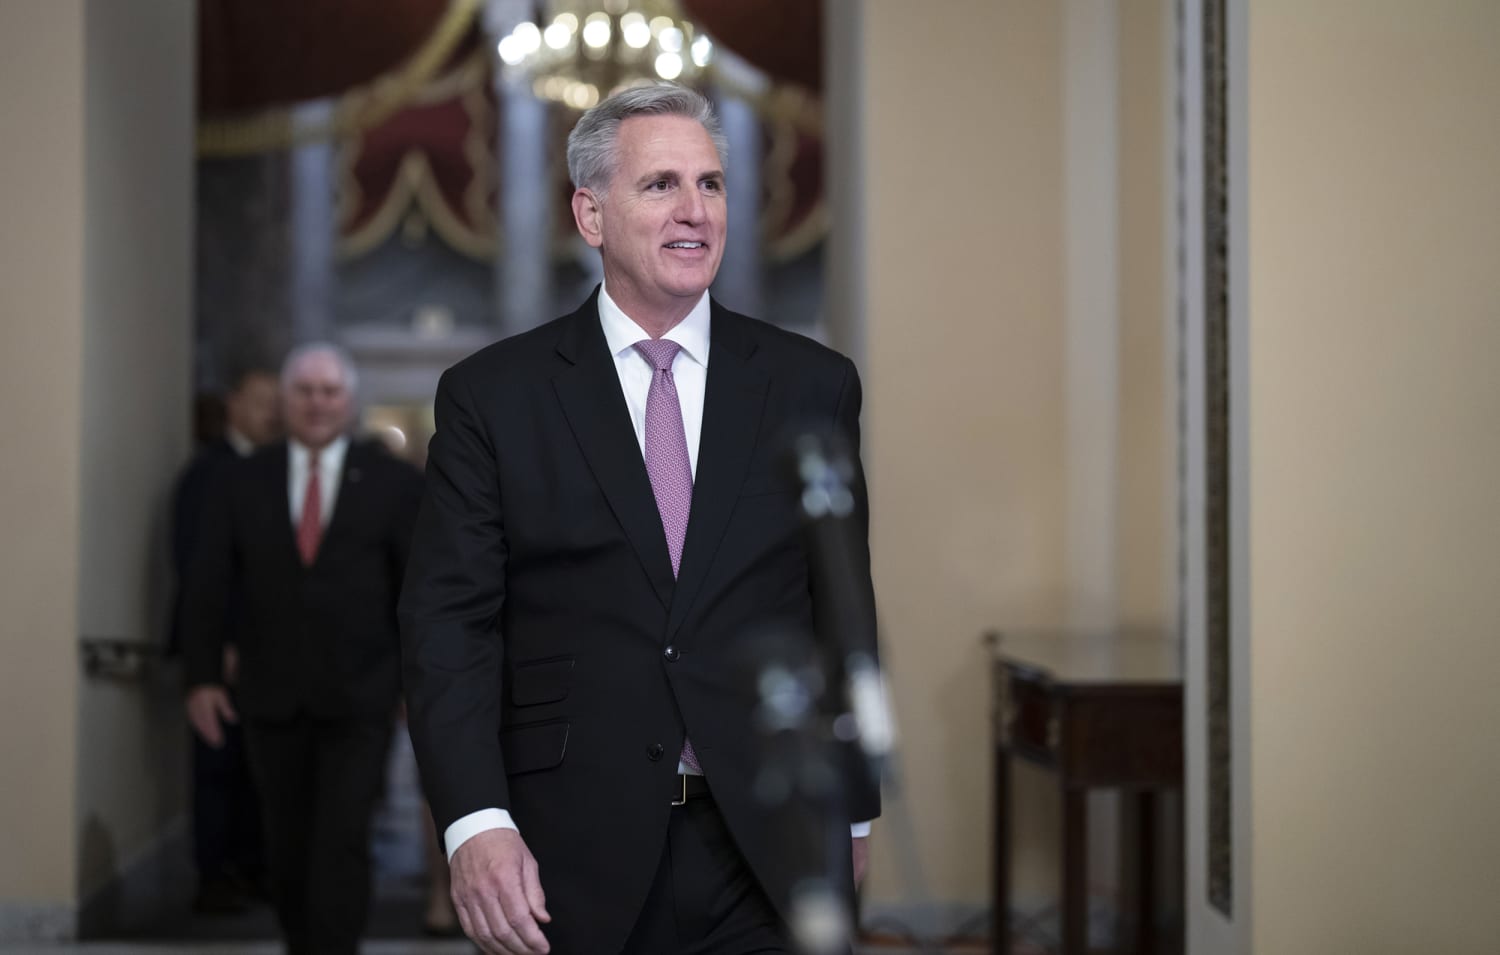 McCarthy to meet with Taiwanese president in visit China calls a ‘provocation’